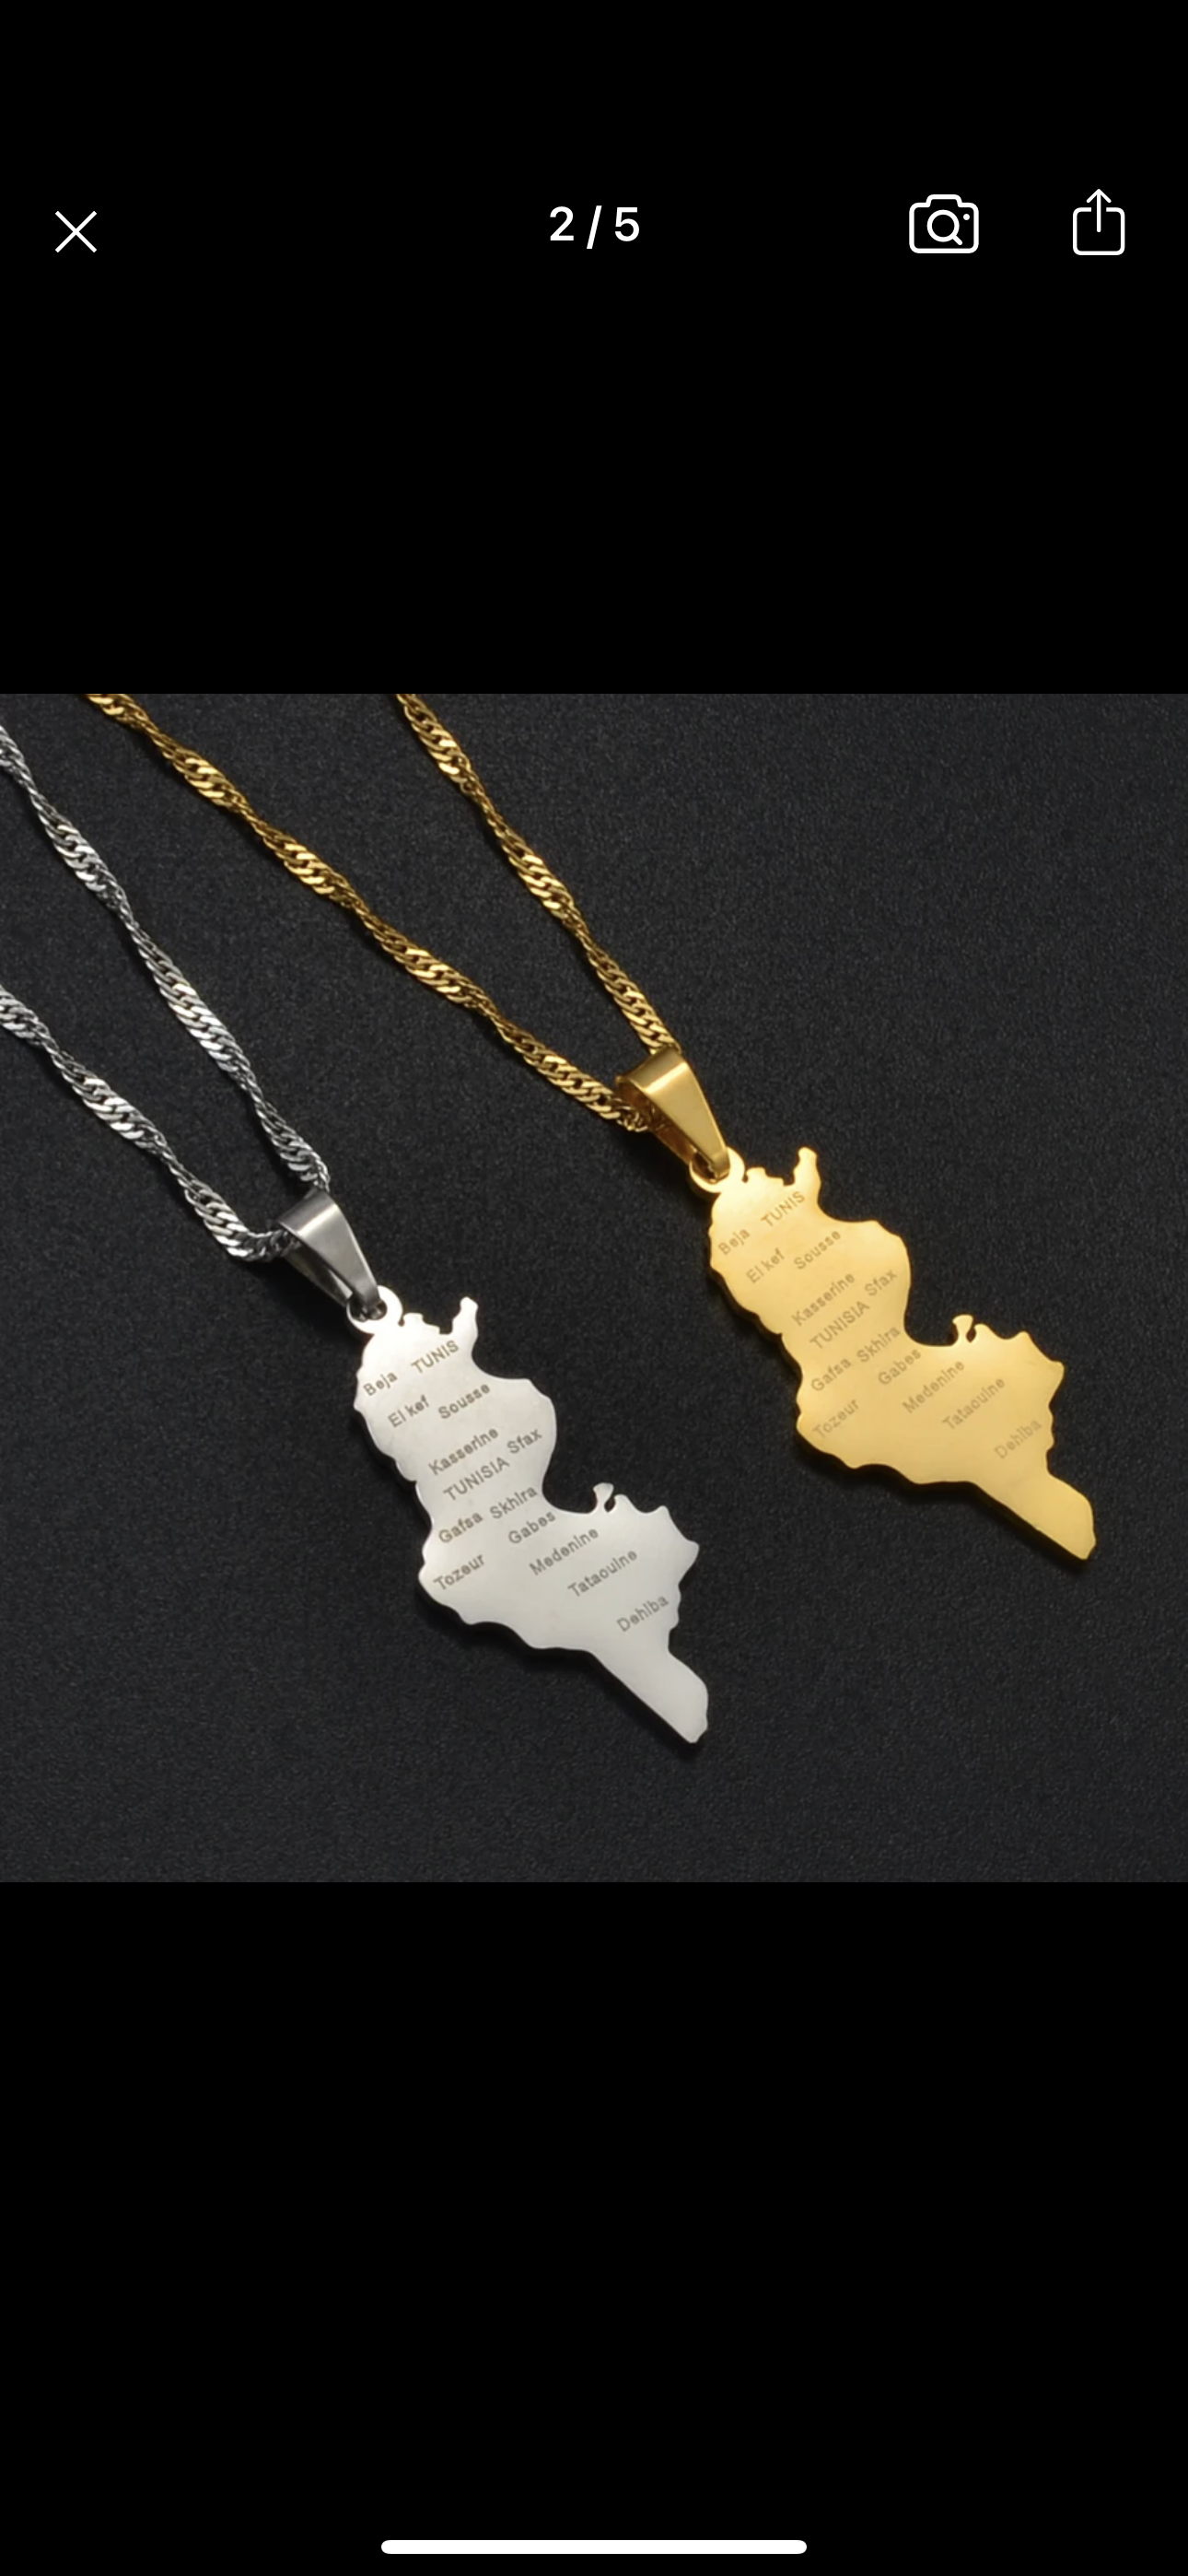 Tunisia Map & Cities Necklace